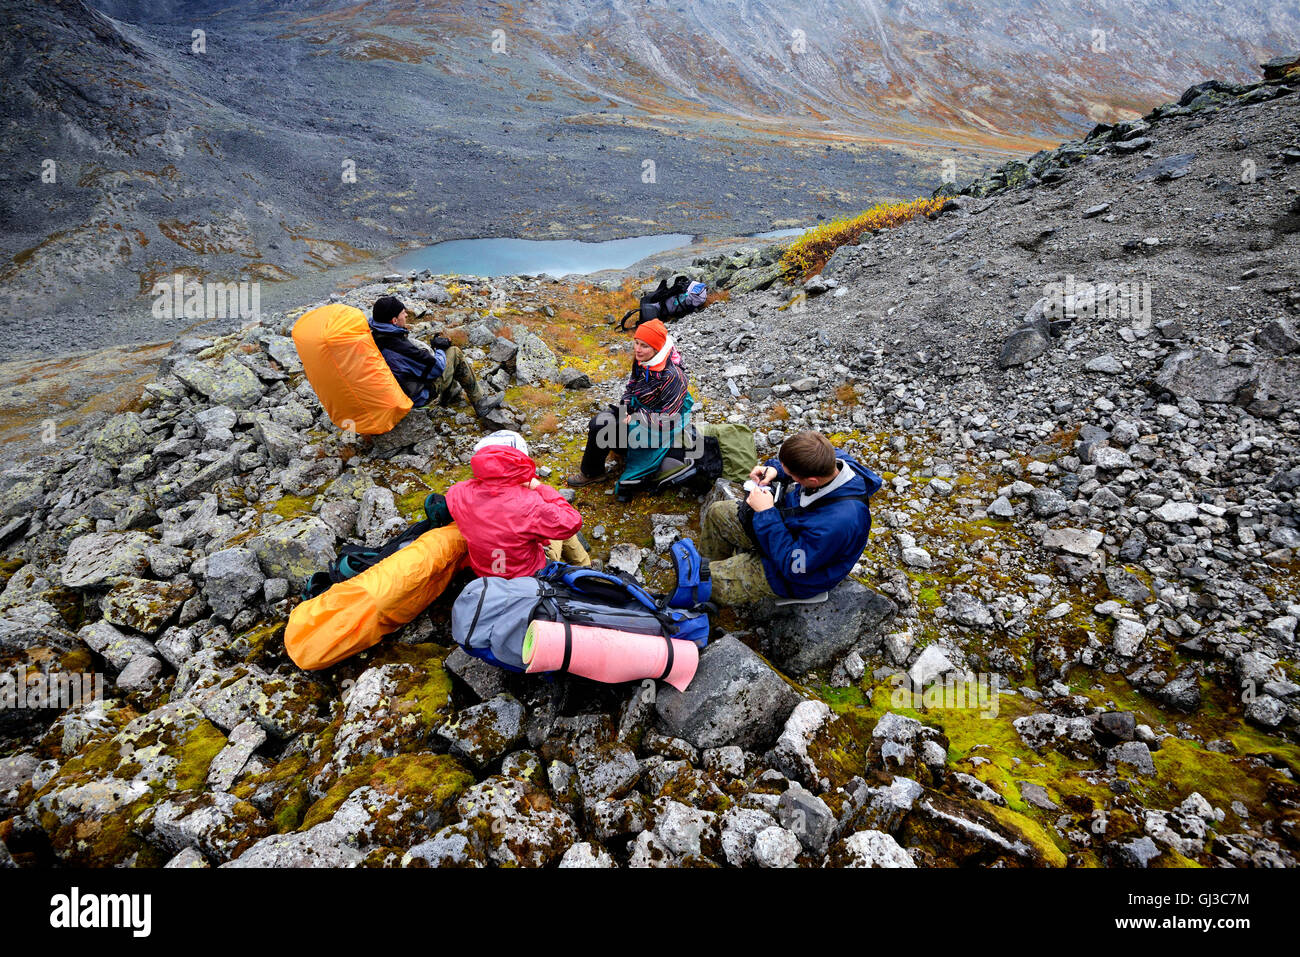 Four adult hikers taking a break in rugged valley landscape, Khibiny mountains, Kola Peninsula, Russia Stock Photo